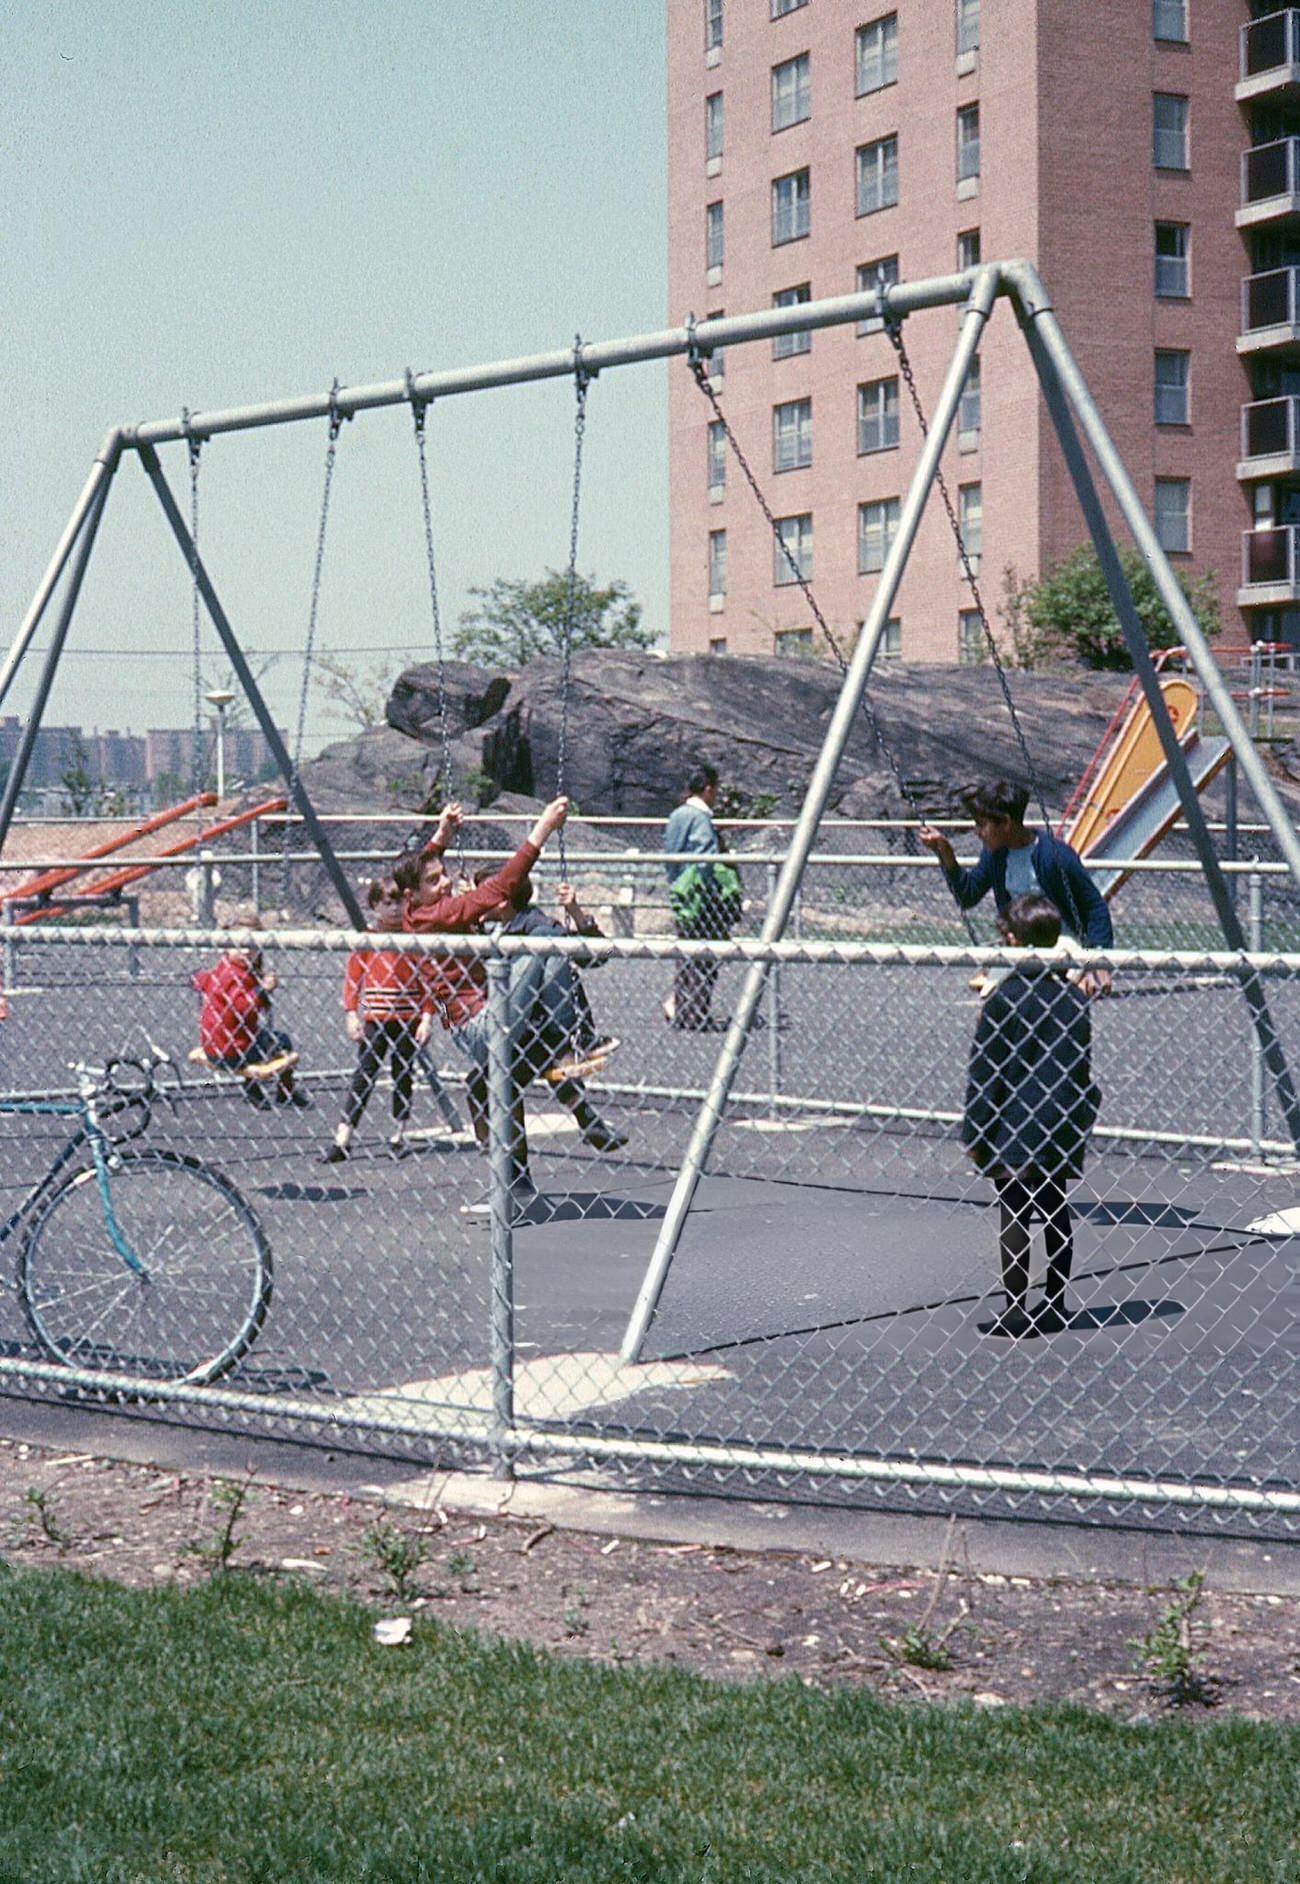 Caucasian And African American Children Play On A Swing Set At A Housing Project In The Bronx, 1968.